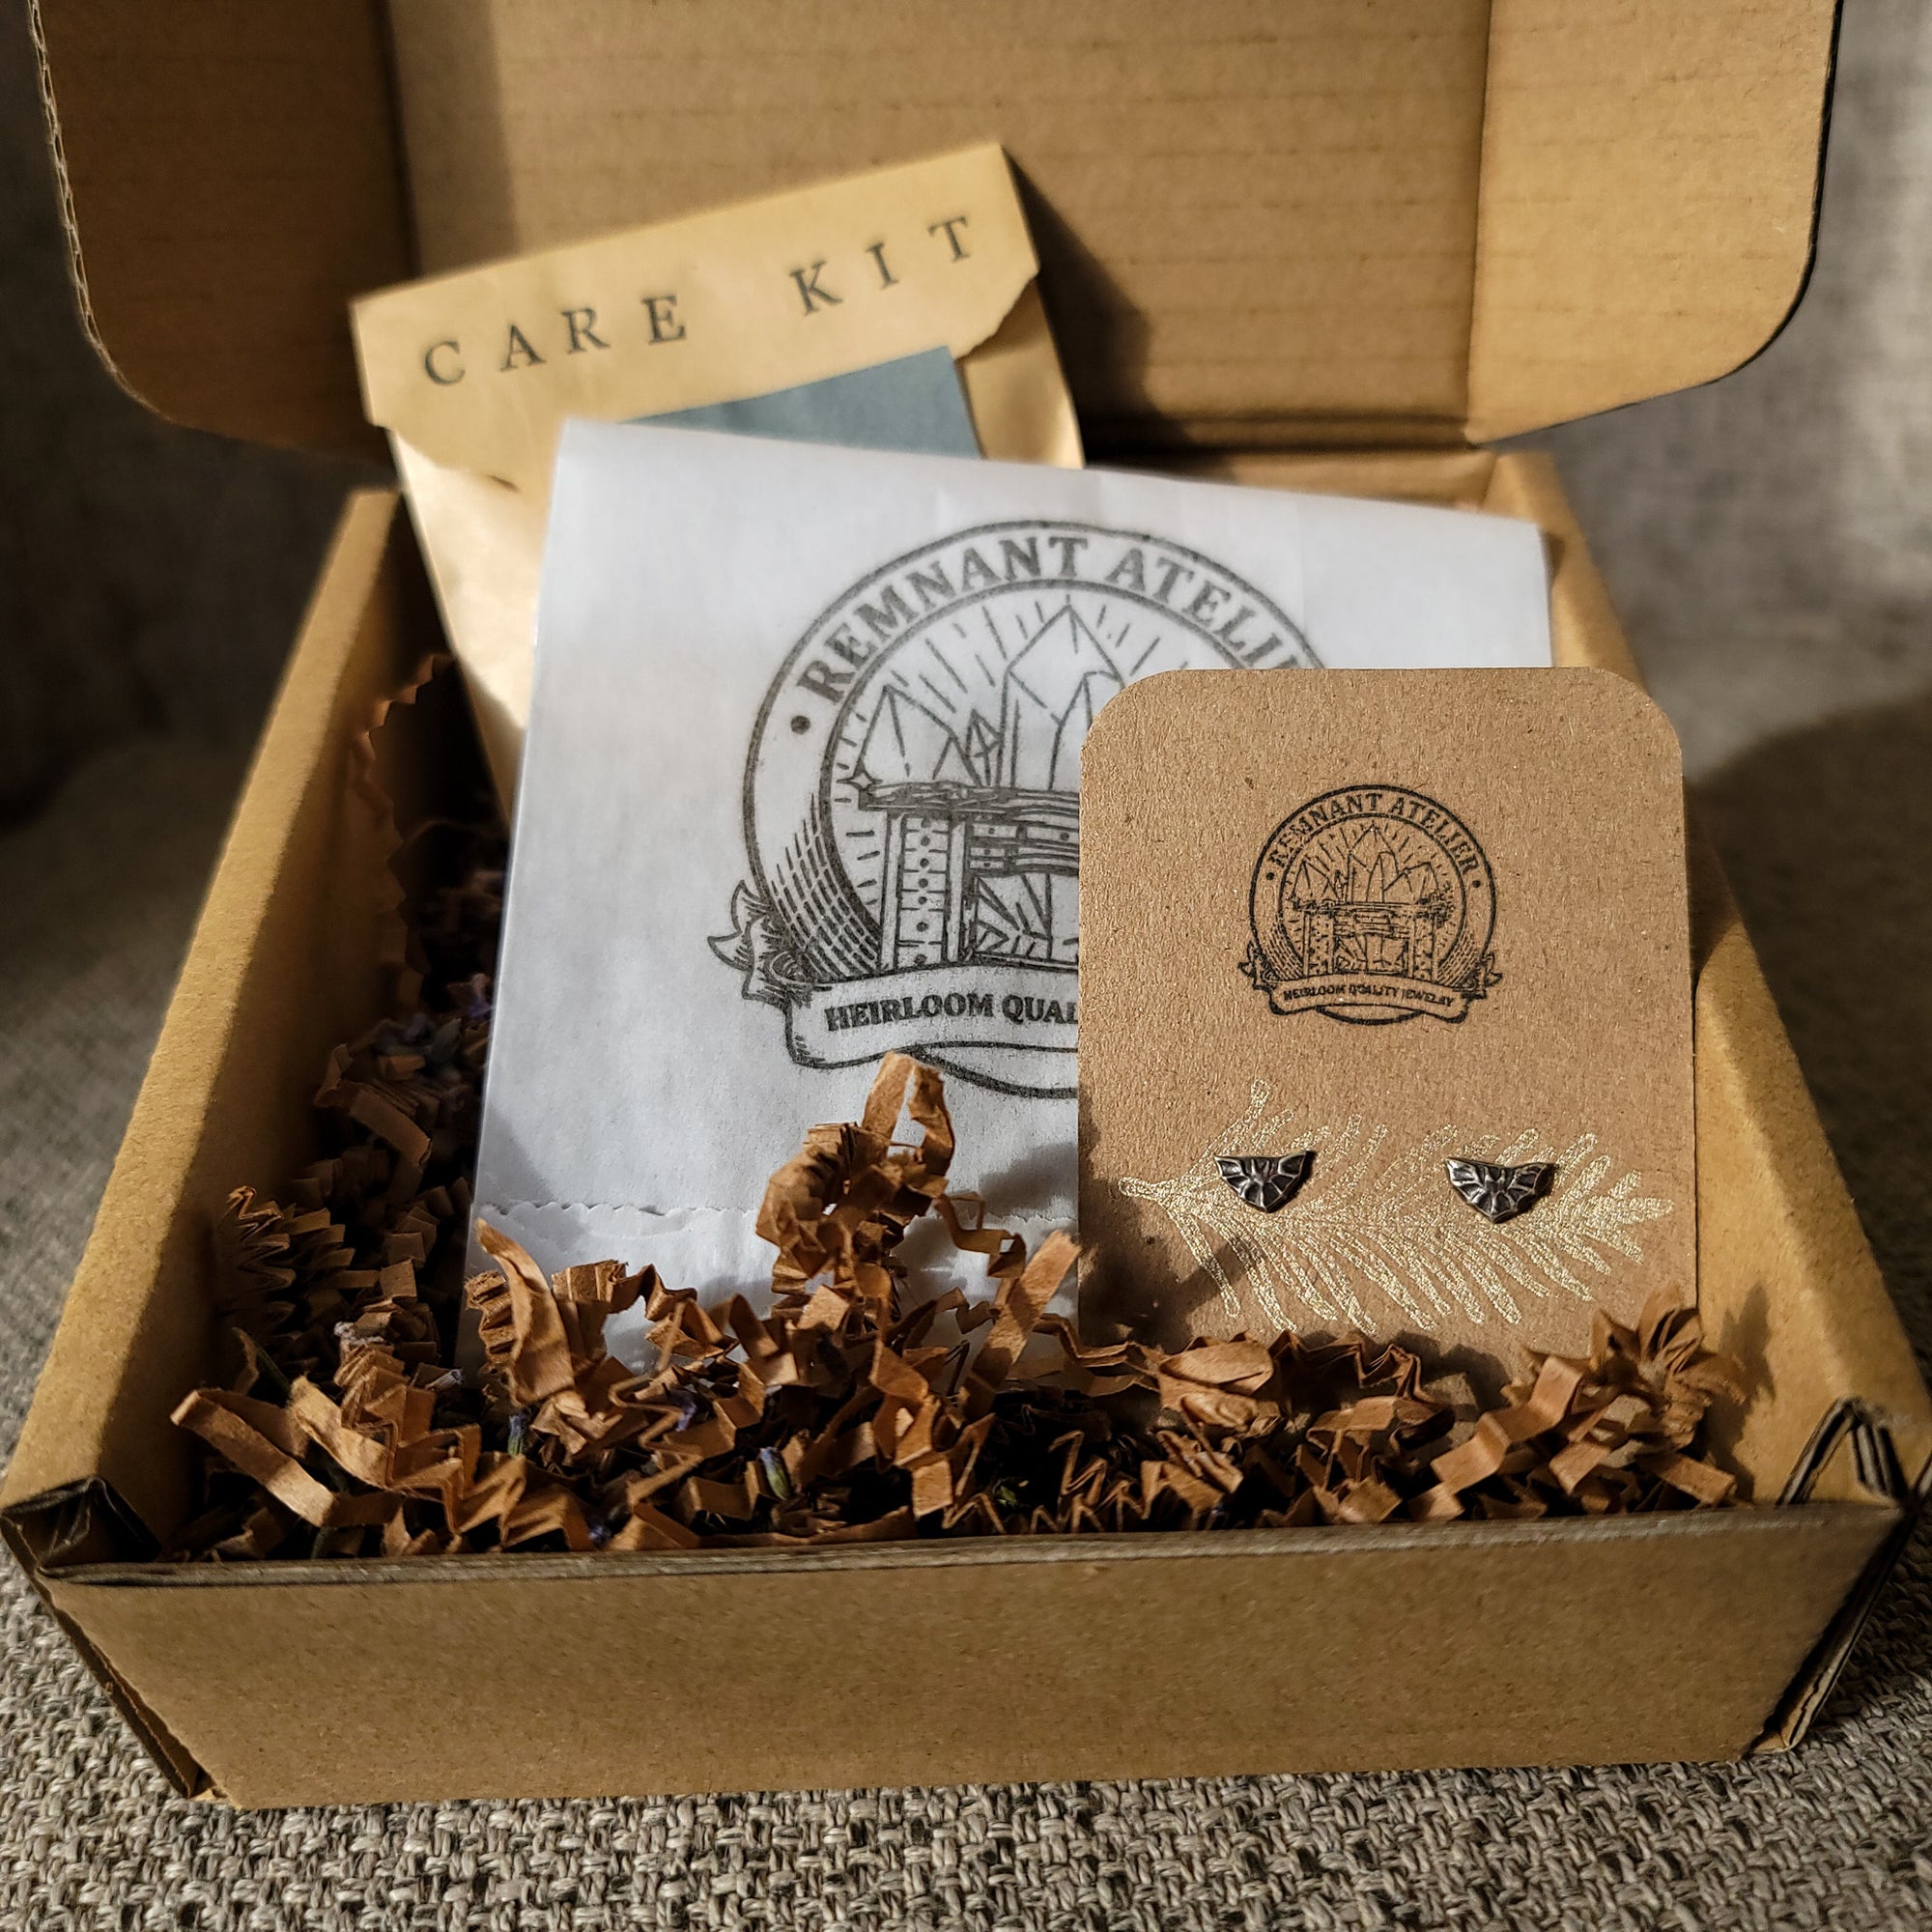 This photo shows a pair of handmade sterling silver bat-shaped stud earrings displayed on a cardboard earring card inside a cardboard box, surrounded by shredded cardboard. The package also includes a care kit to keep the jewelry in top condition.